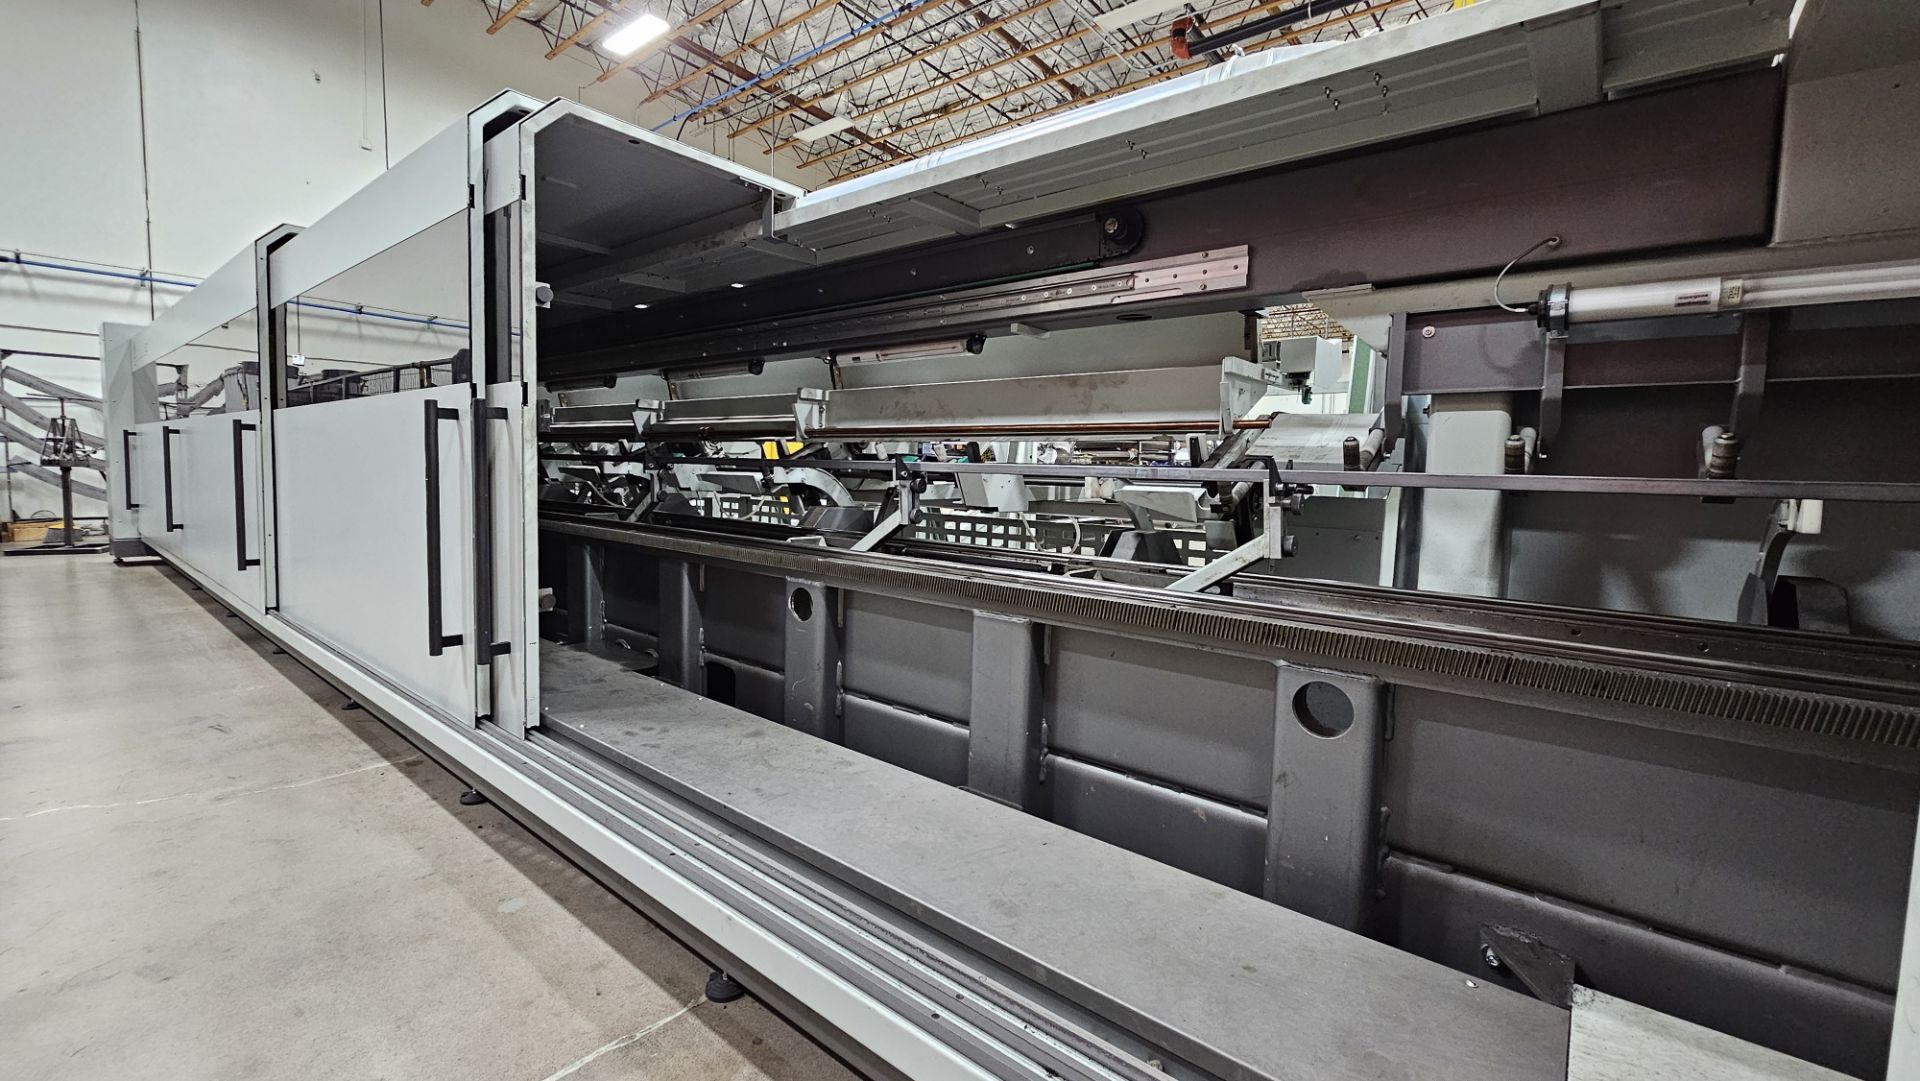 BLM LC5 4-kW Combination Tube & Sheet Metal Laser Cutting System - Image 13 of 43